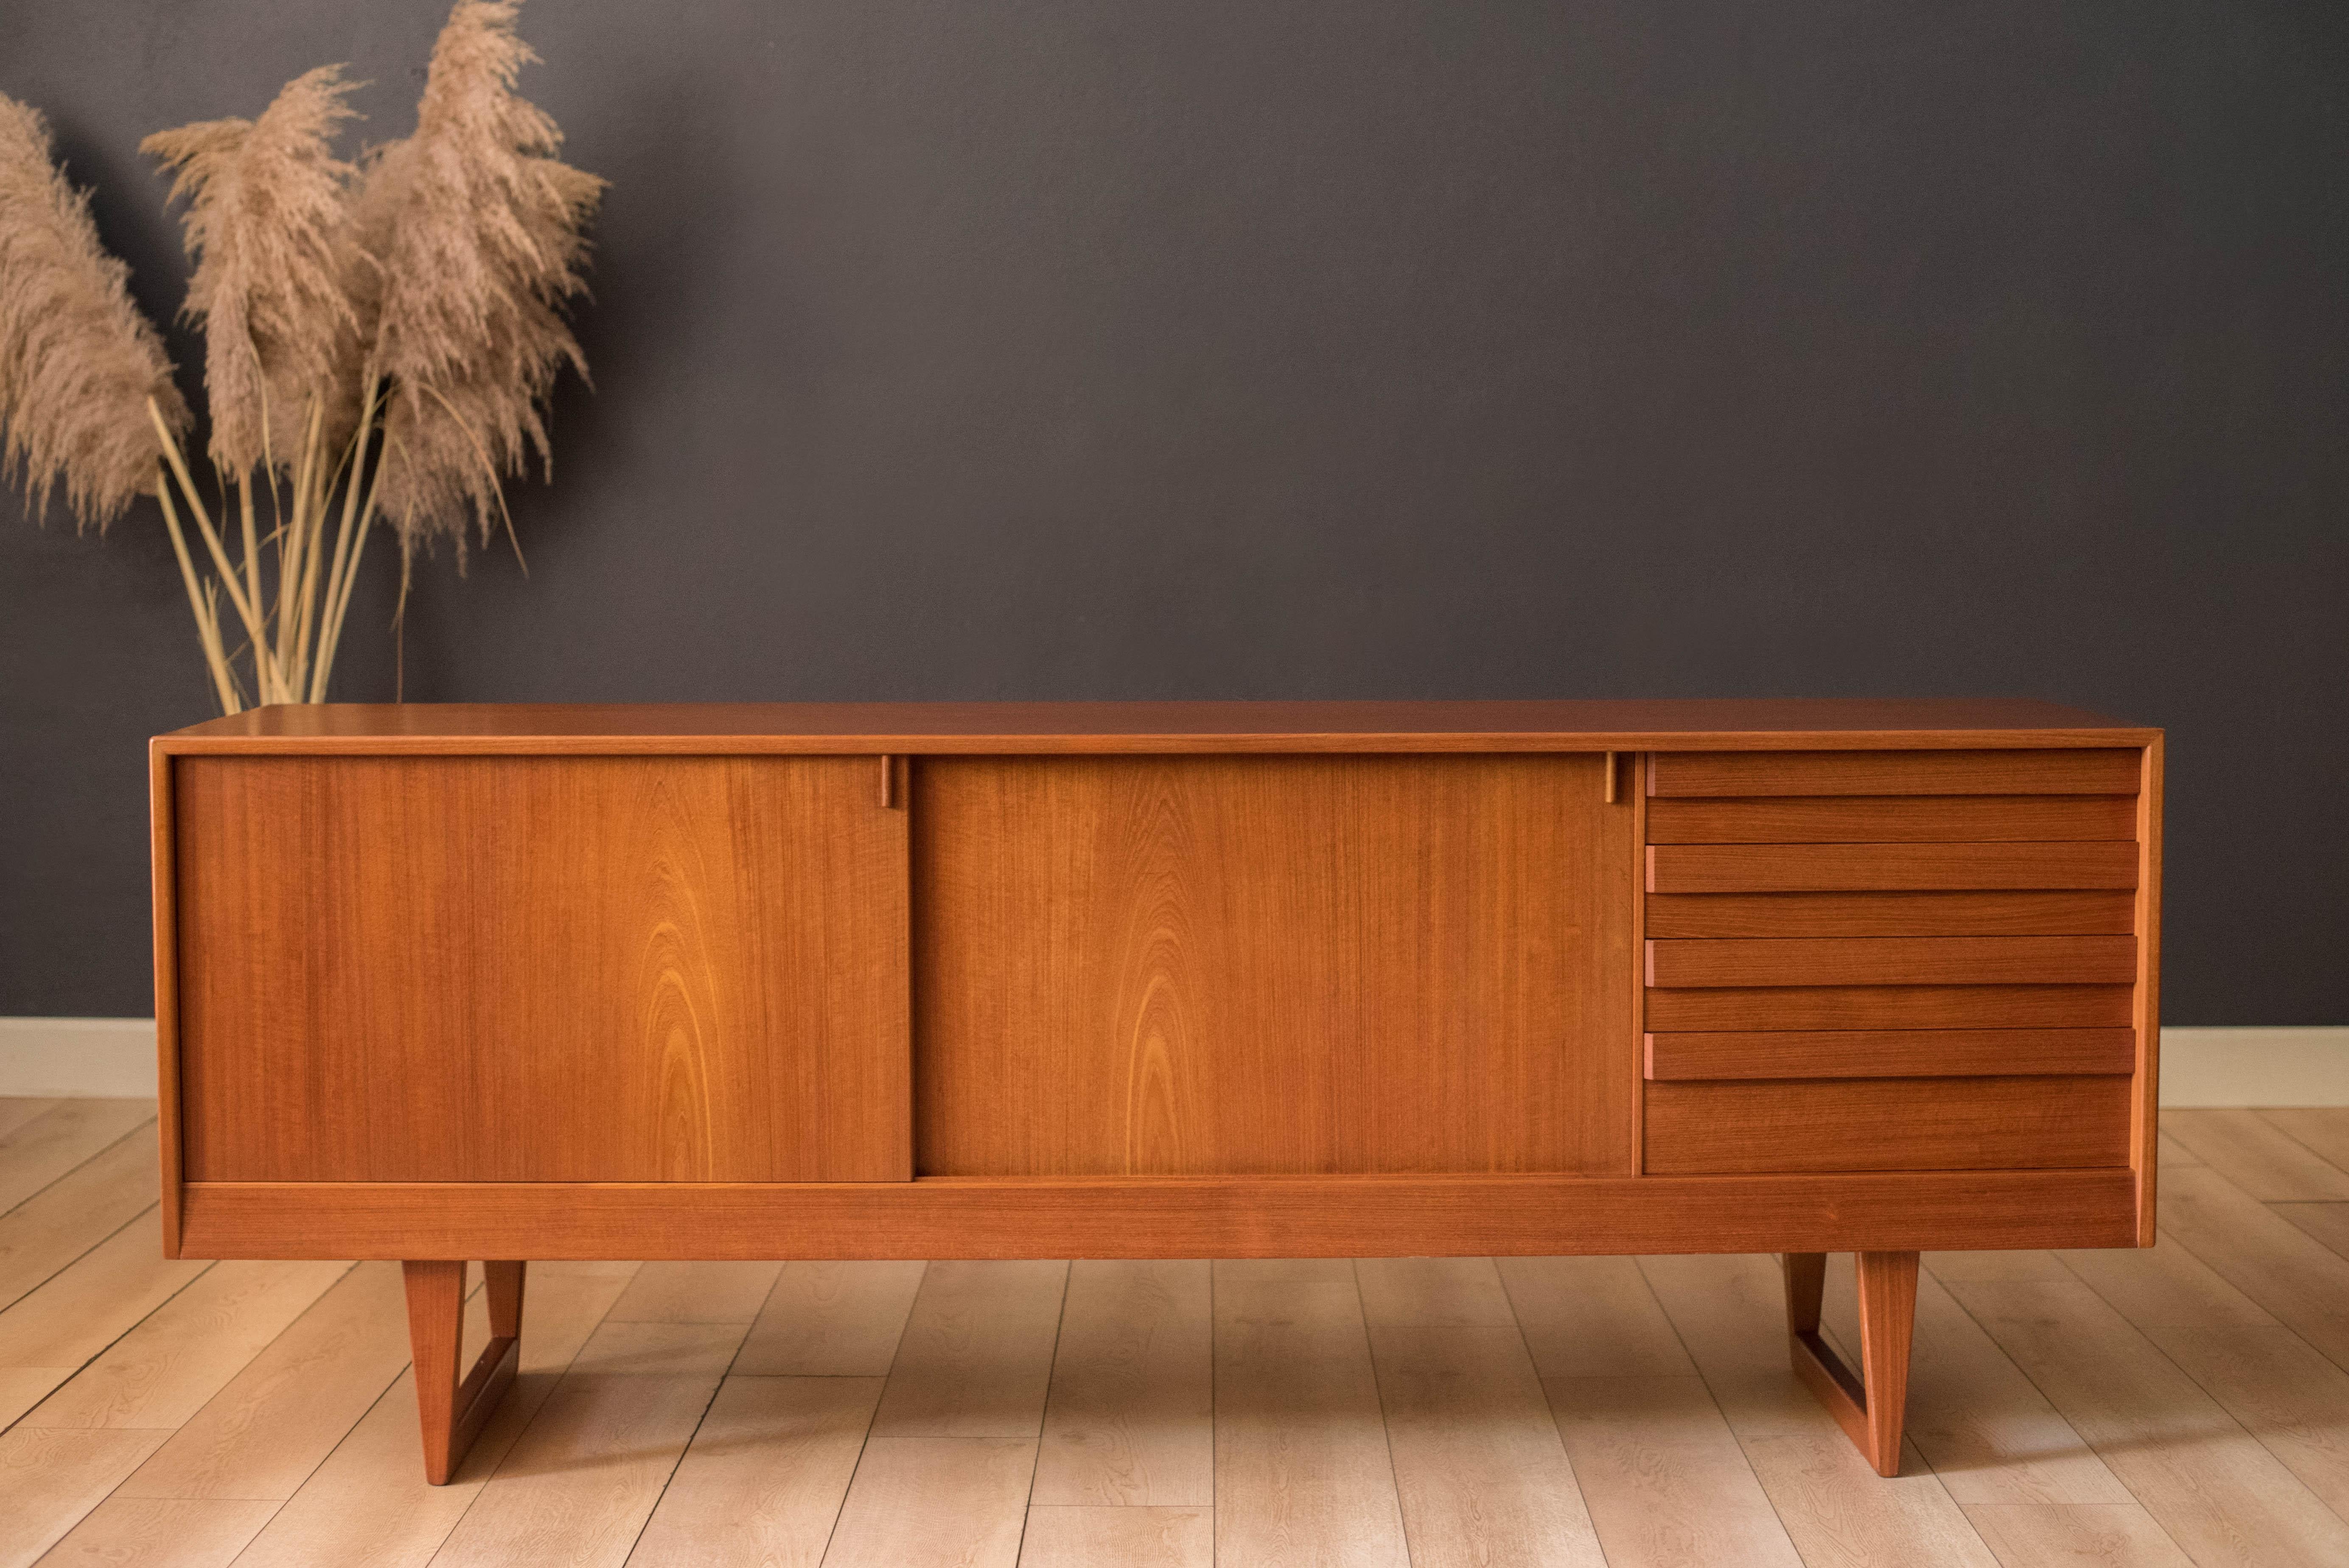 Vintage Danish modern sideboard credenza in teak designed by Kurt Ostervig for KP Mobler, made in Denmark, circa 1960s. This piece maximizes storage space including four organizing dovetail drawers and sliding doors that reveal two open cabinets